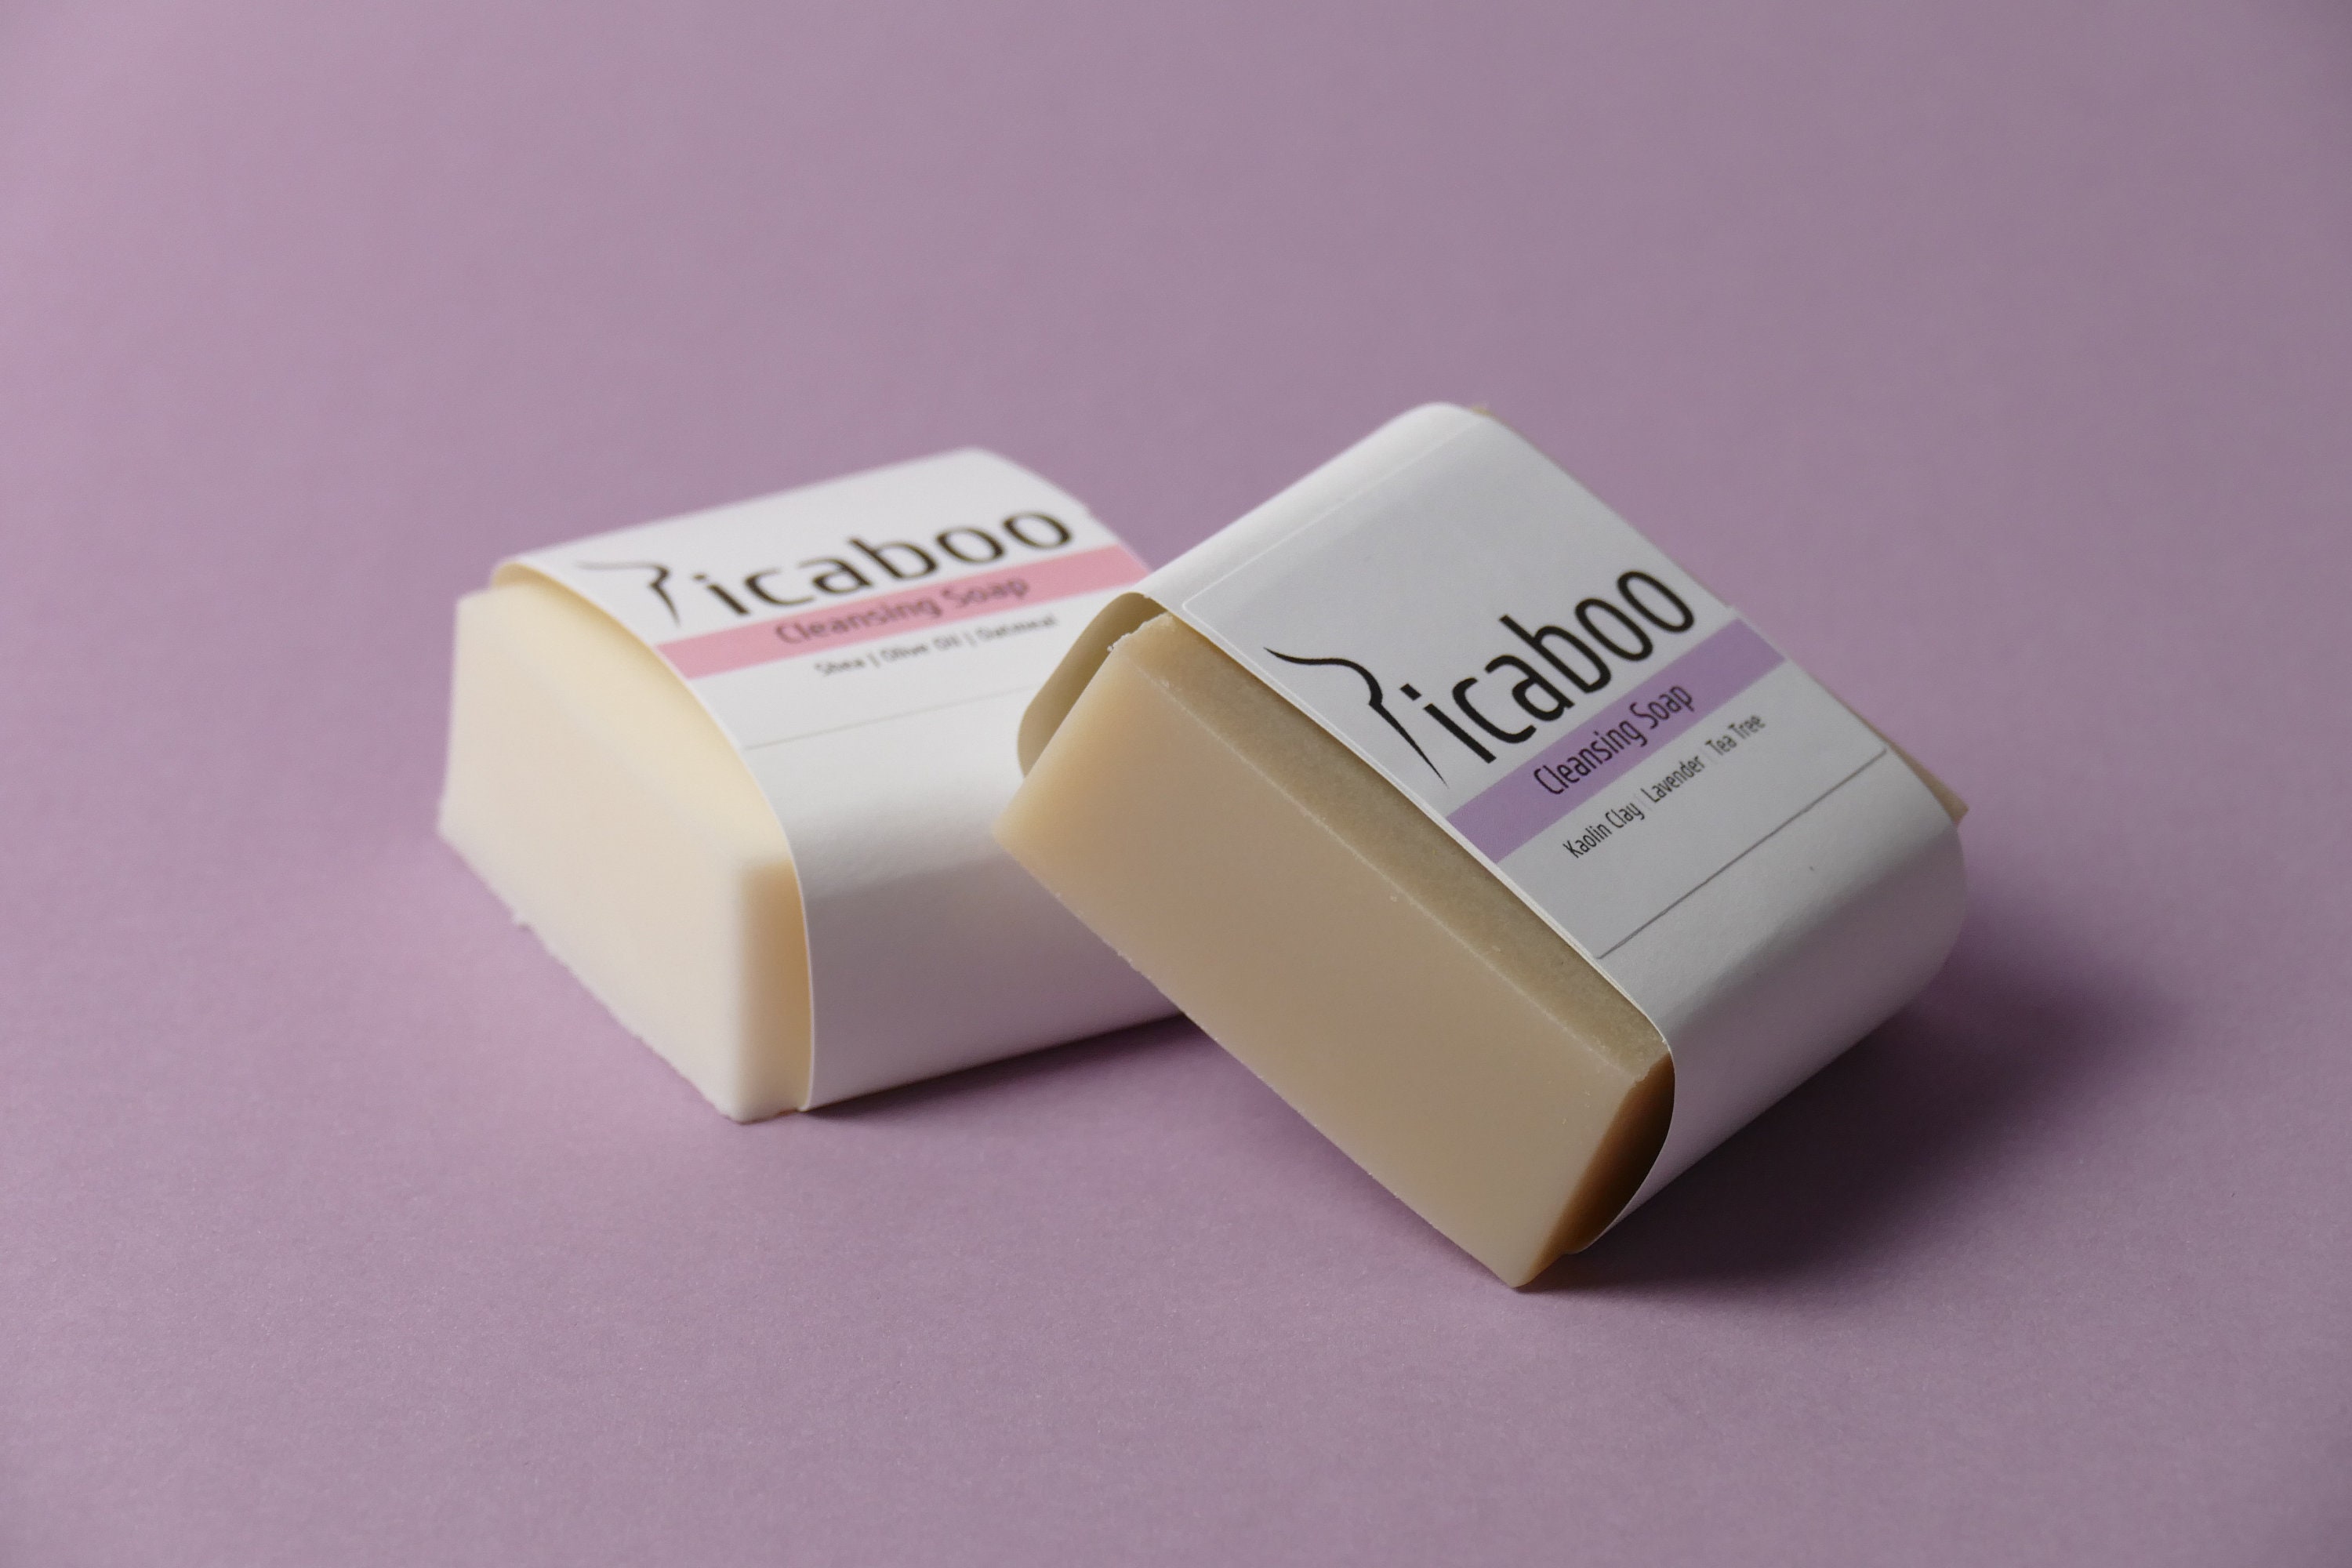 Picaboo Cleansing Soap Duo -  Australia